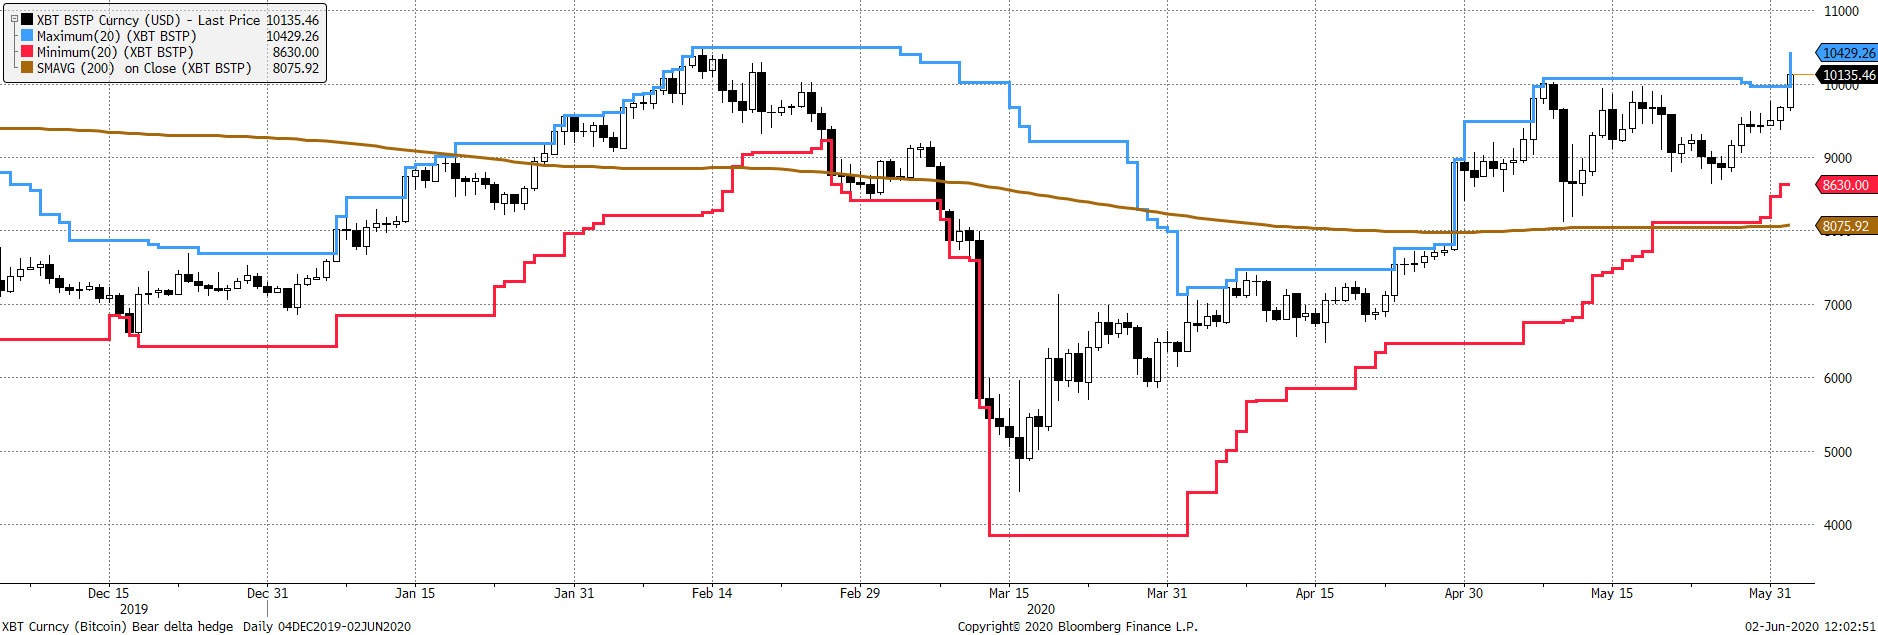 Source: Bloomberg. Bitcoin with 20-day max (blue) and min (red) lines and a 200-day moving average (brown). Past year.